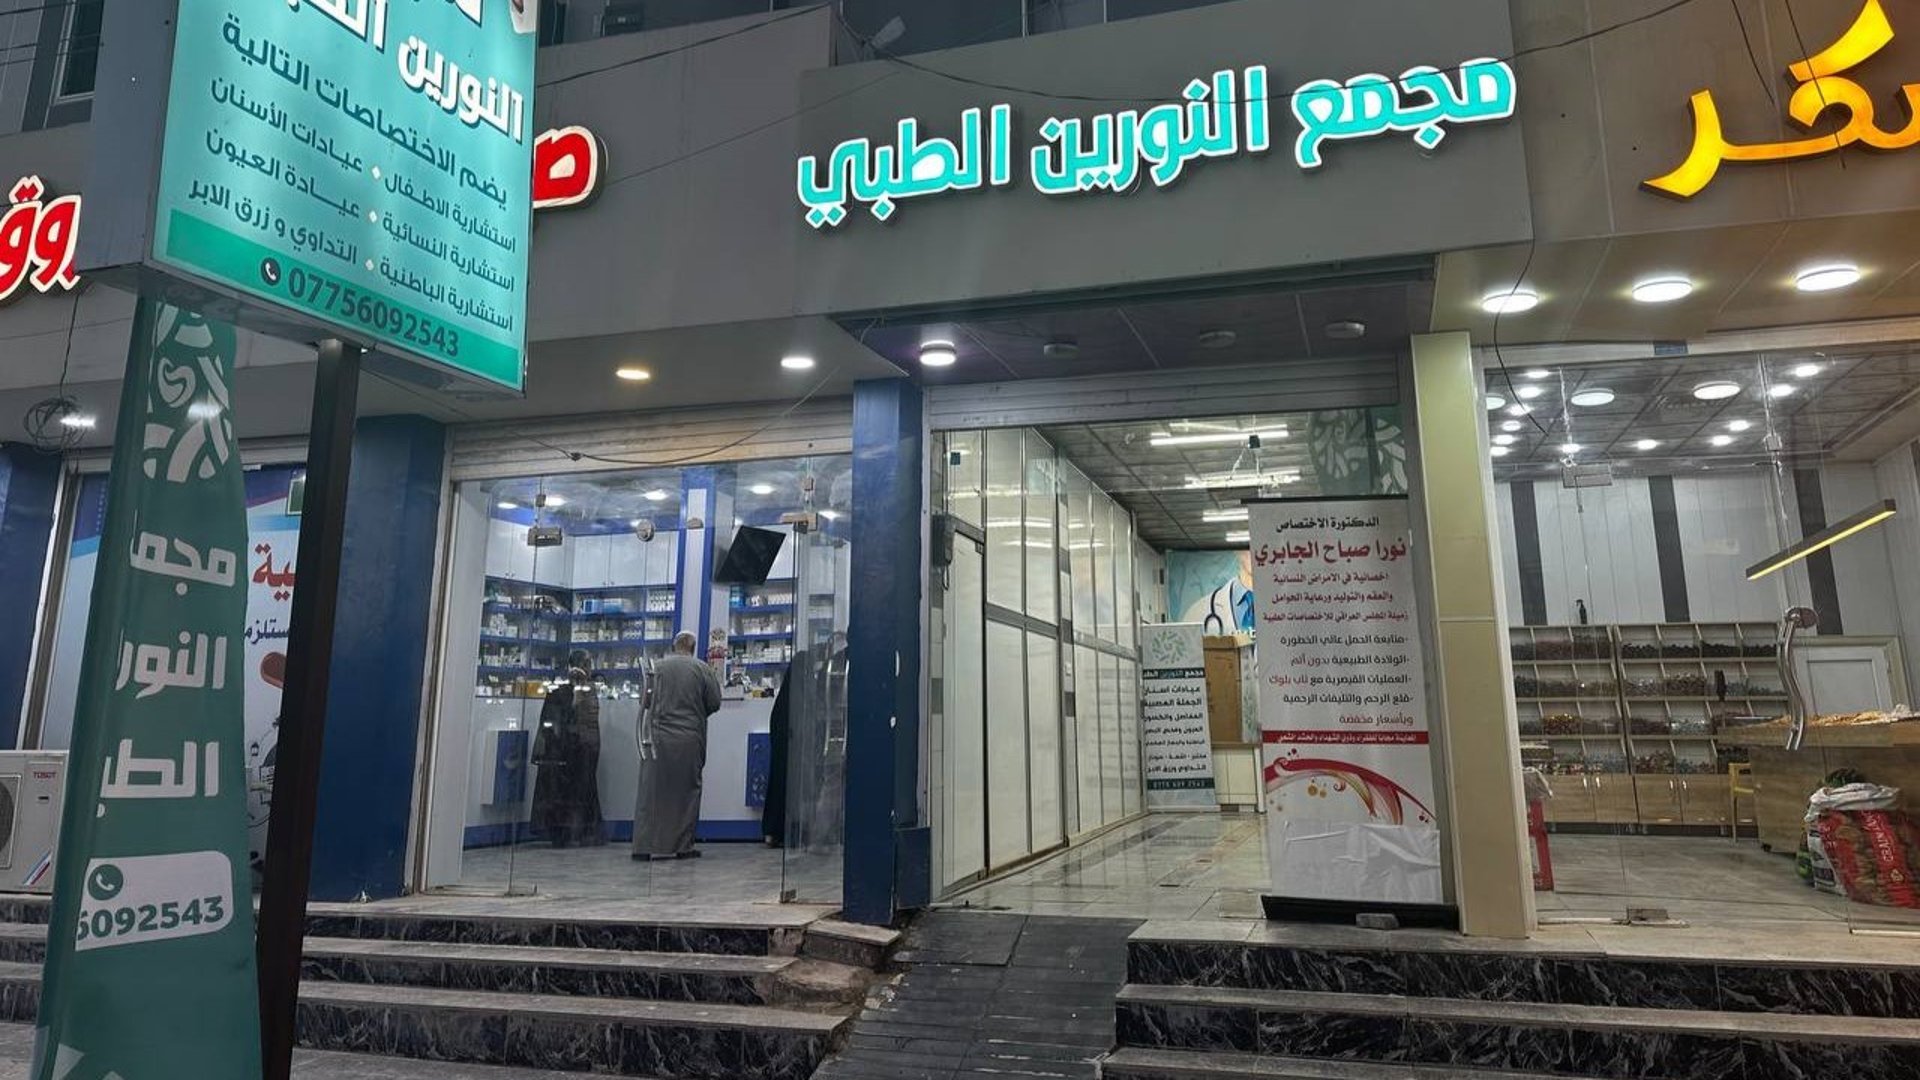 Karbala medical complex offers free healthcare and discounts in charity drive